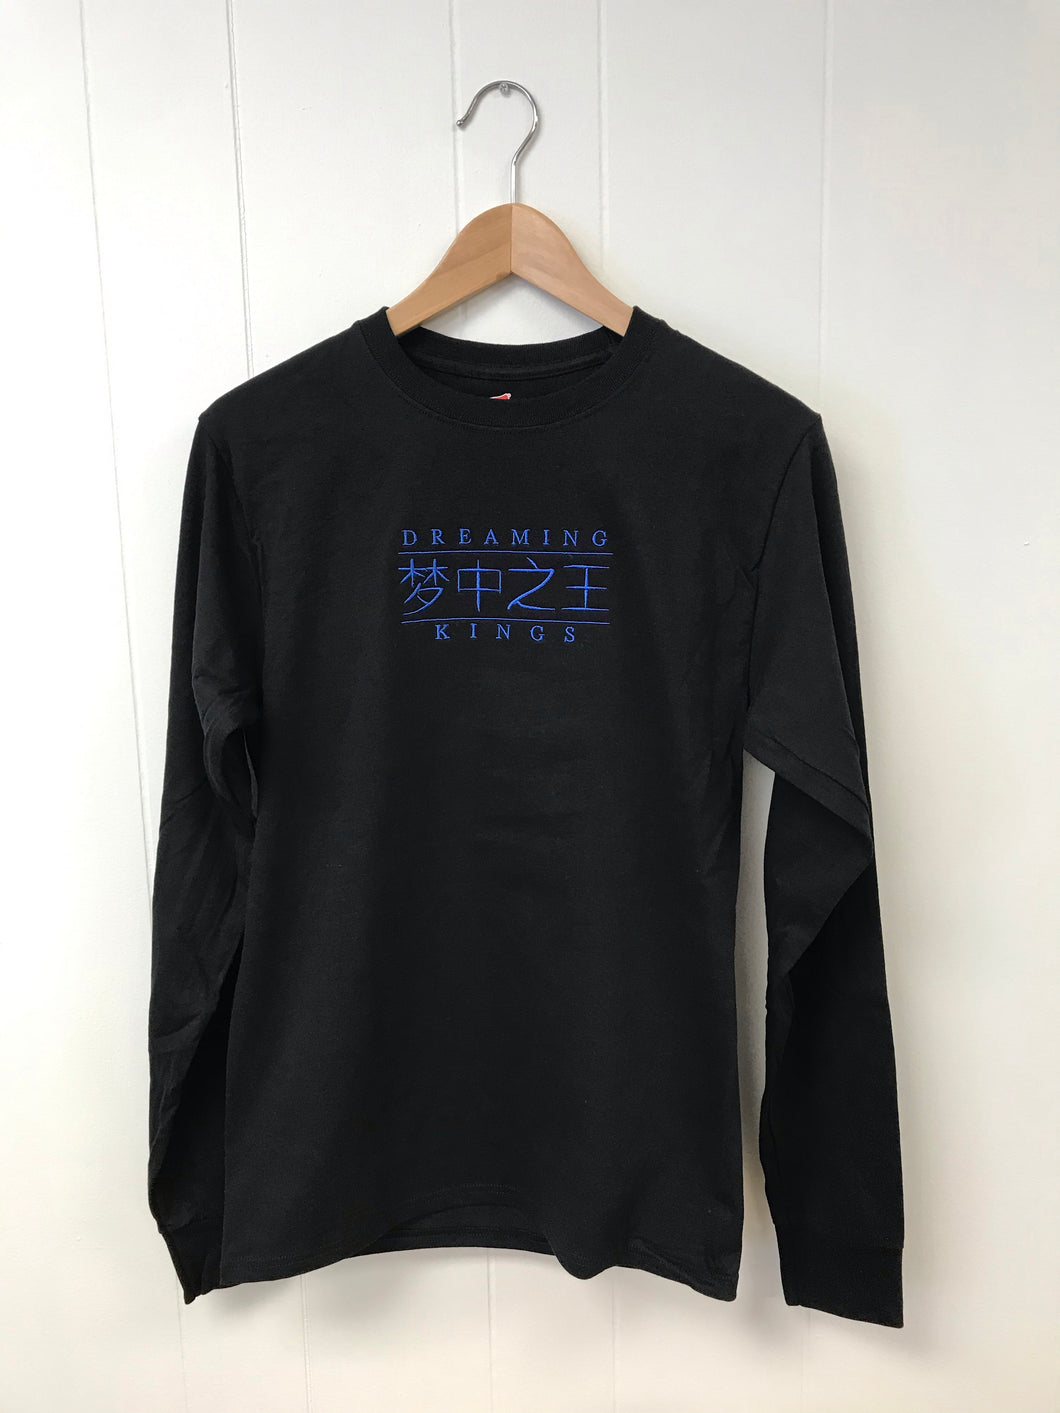 Dreaming Kings Chinese Long Sleeve T-Shirts (Various Colors Available)